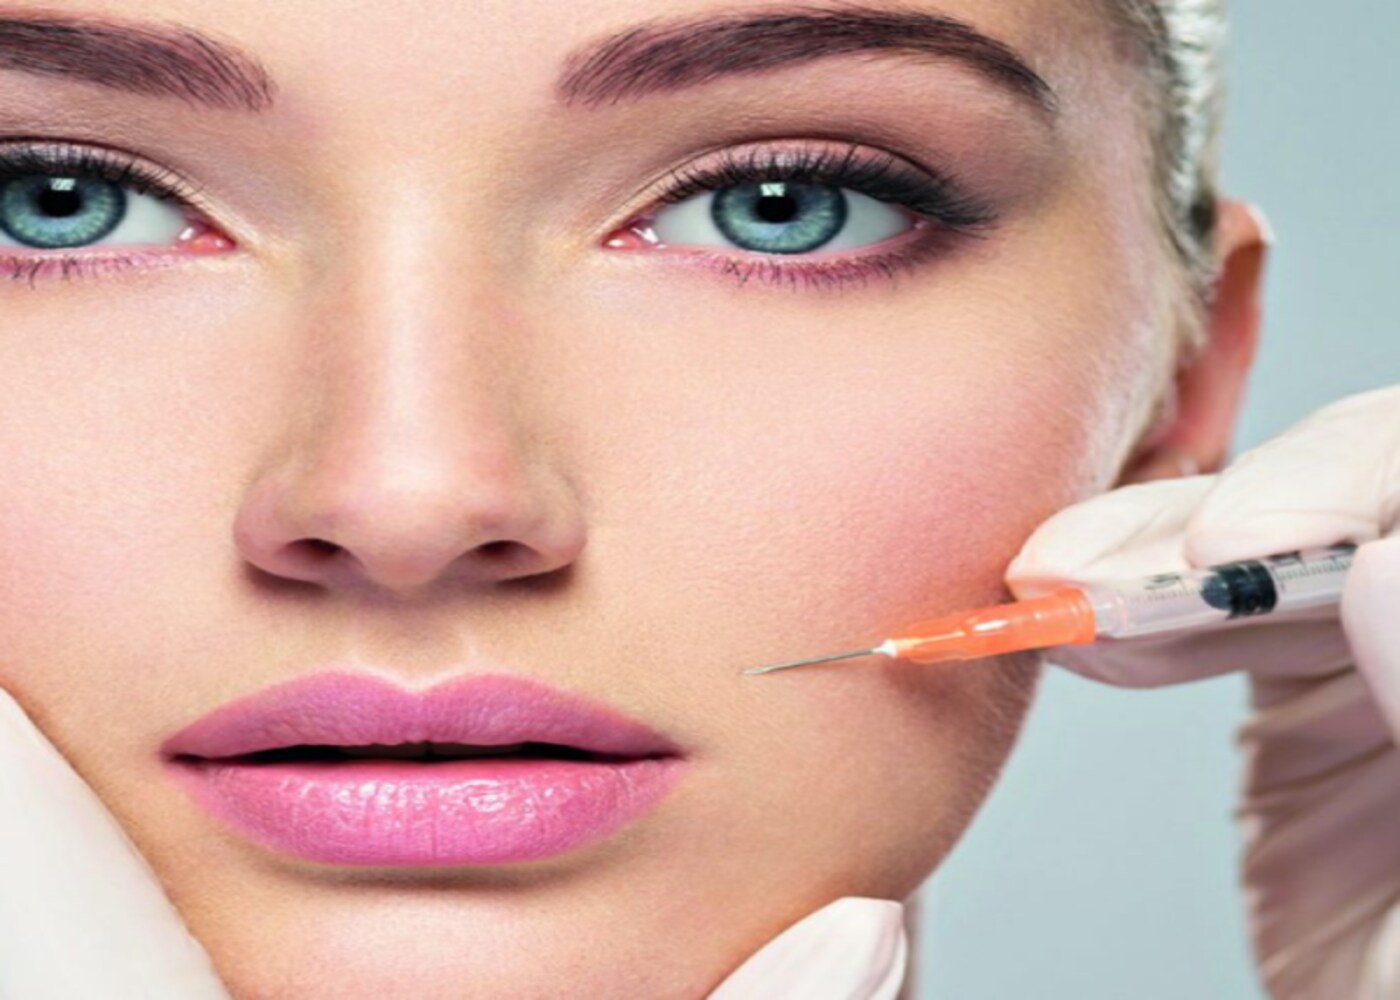 Why Should You Choose Rejeunesse Lip Filler for Lip Filler and Body? - WriteUpCafe.com